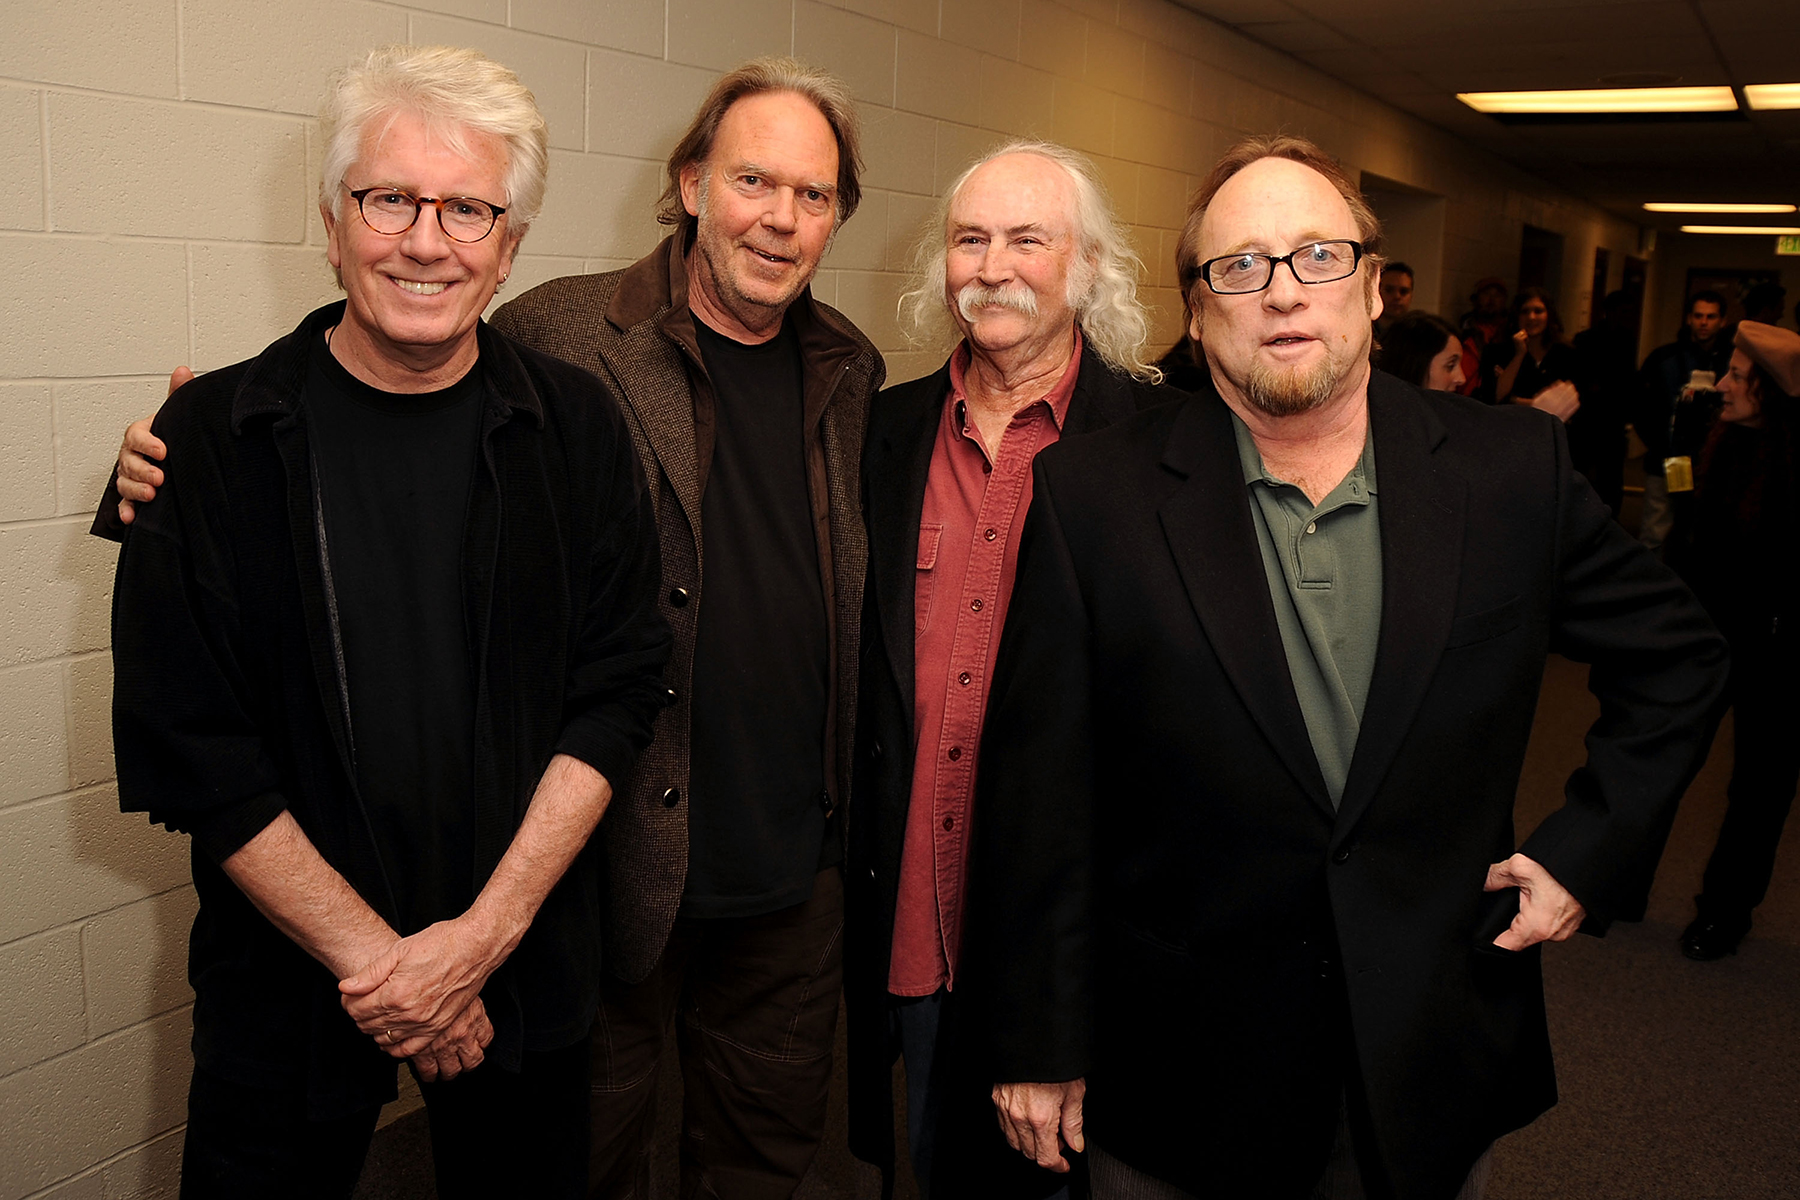 Crosby, Stills, and Nash are joined by Neil Young in removing music from Spotify